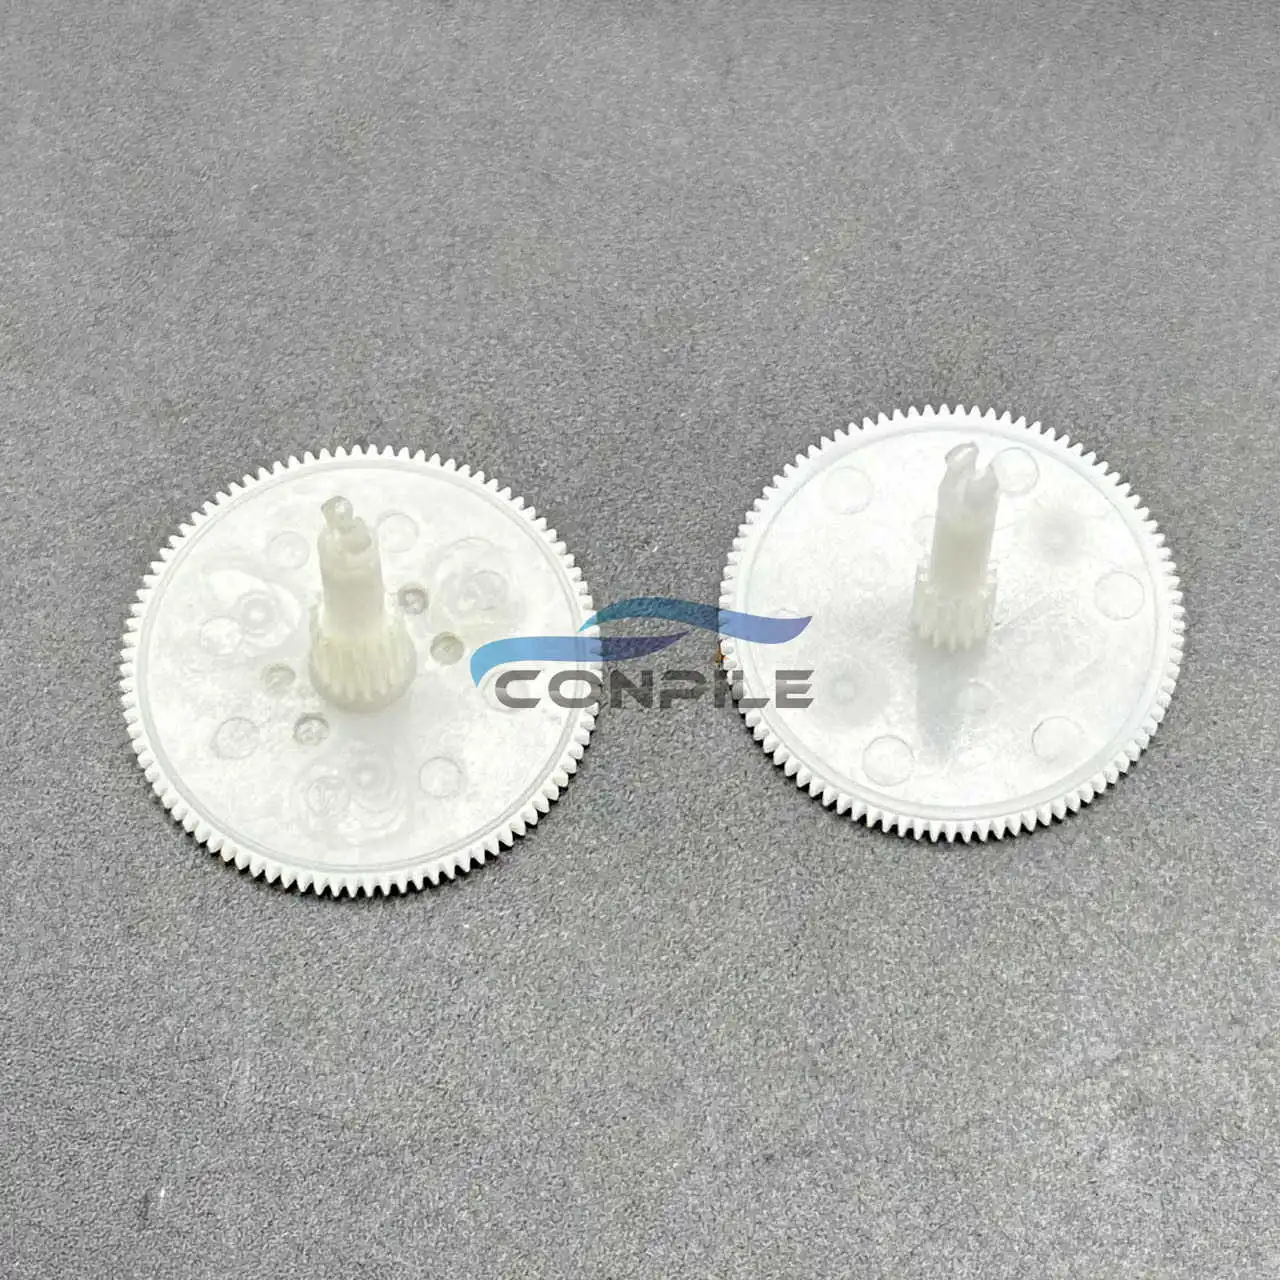 

1pc for Sony KSS-210A KSS-212A KSS-150A 240A fKSS-213C laser head tracking gear Optical pick up